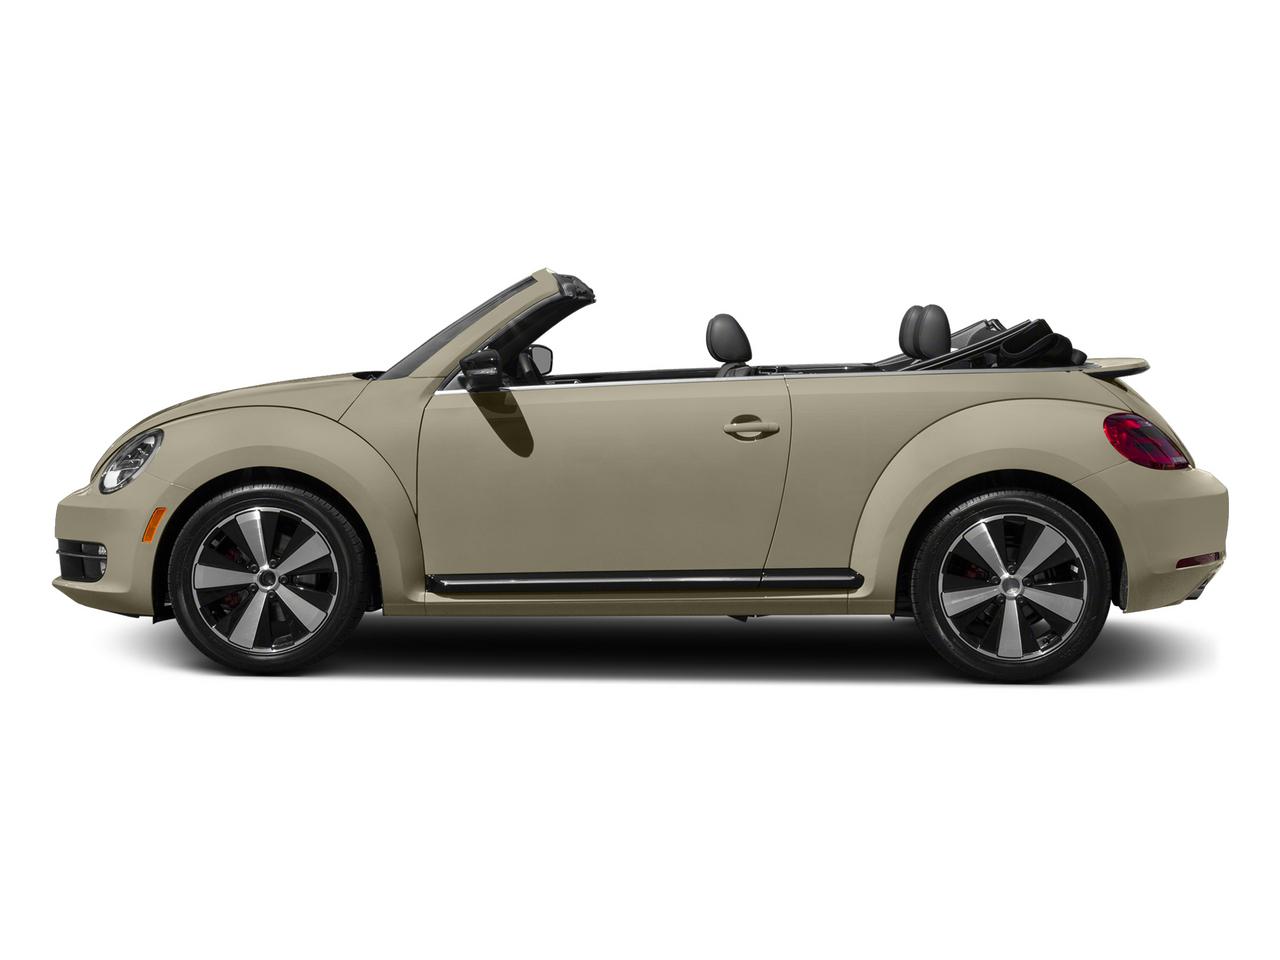 Used 2015 Volkswagen Beetle 1.8 with VIN 3VW507AT9FM810303 for sale in Robstown, TX